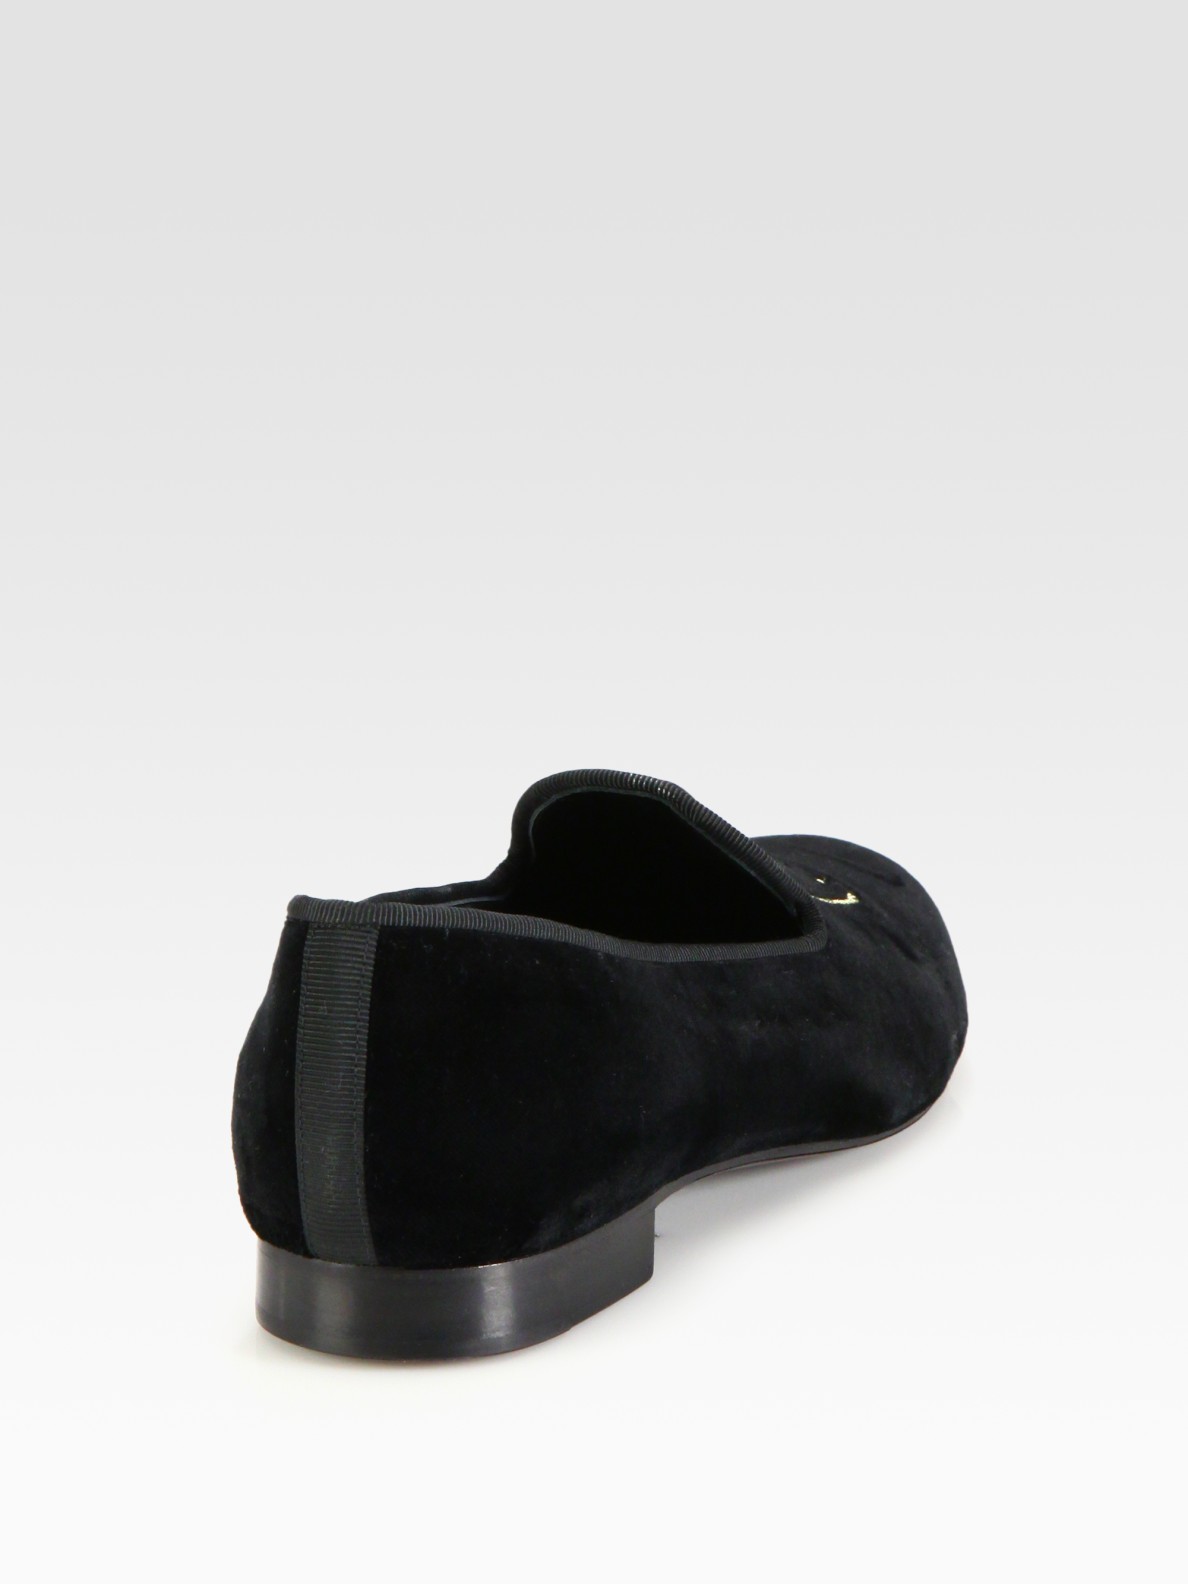 Marc jacobs Embroidered Velvet Smoking Slippers in Black | Lyst